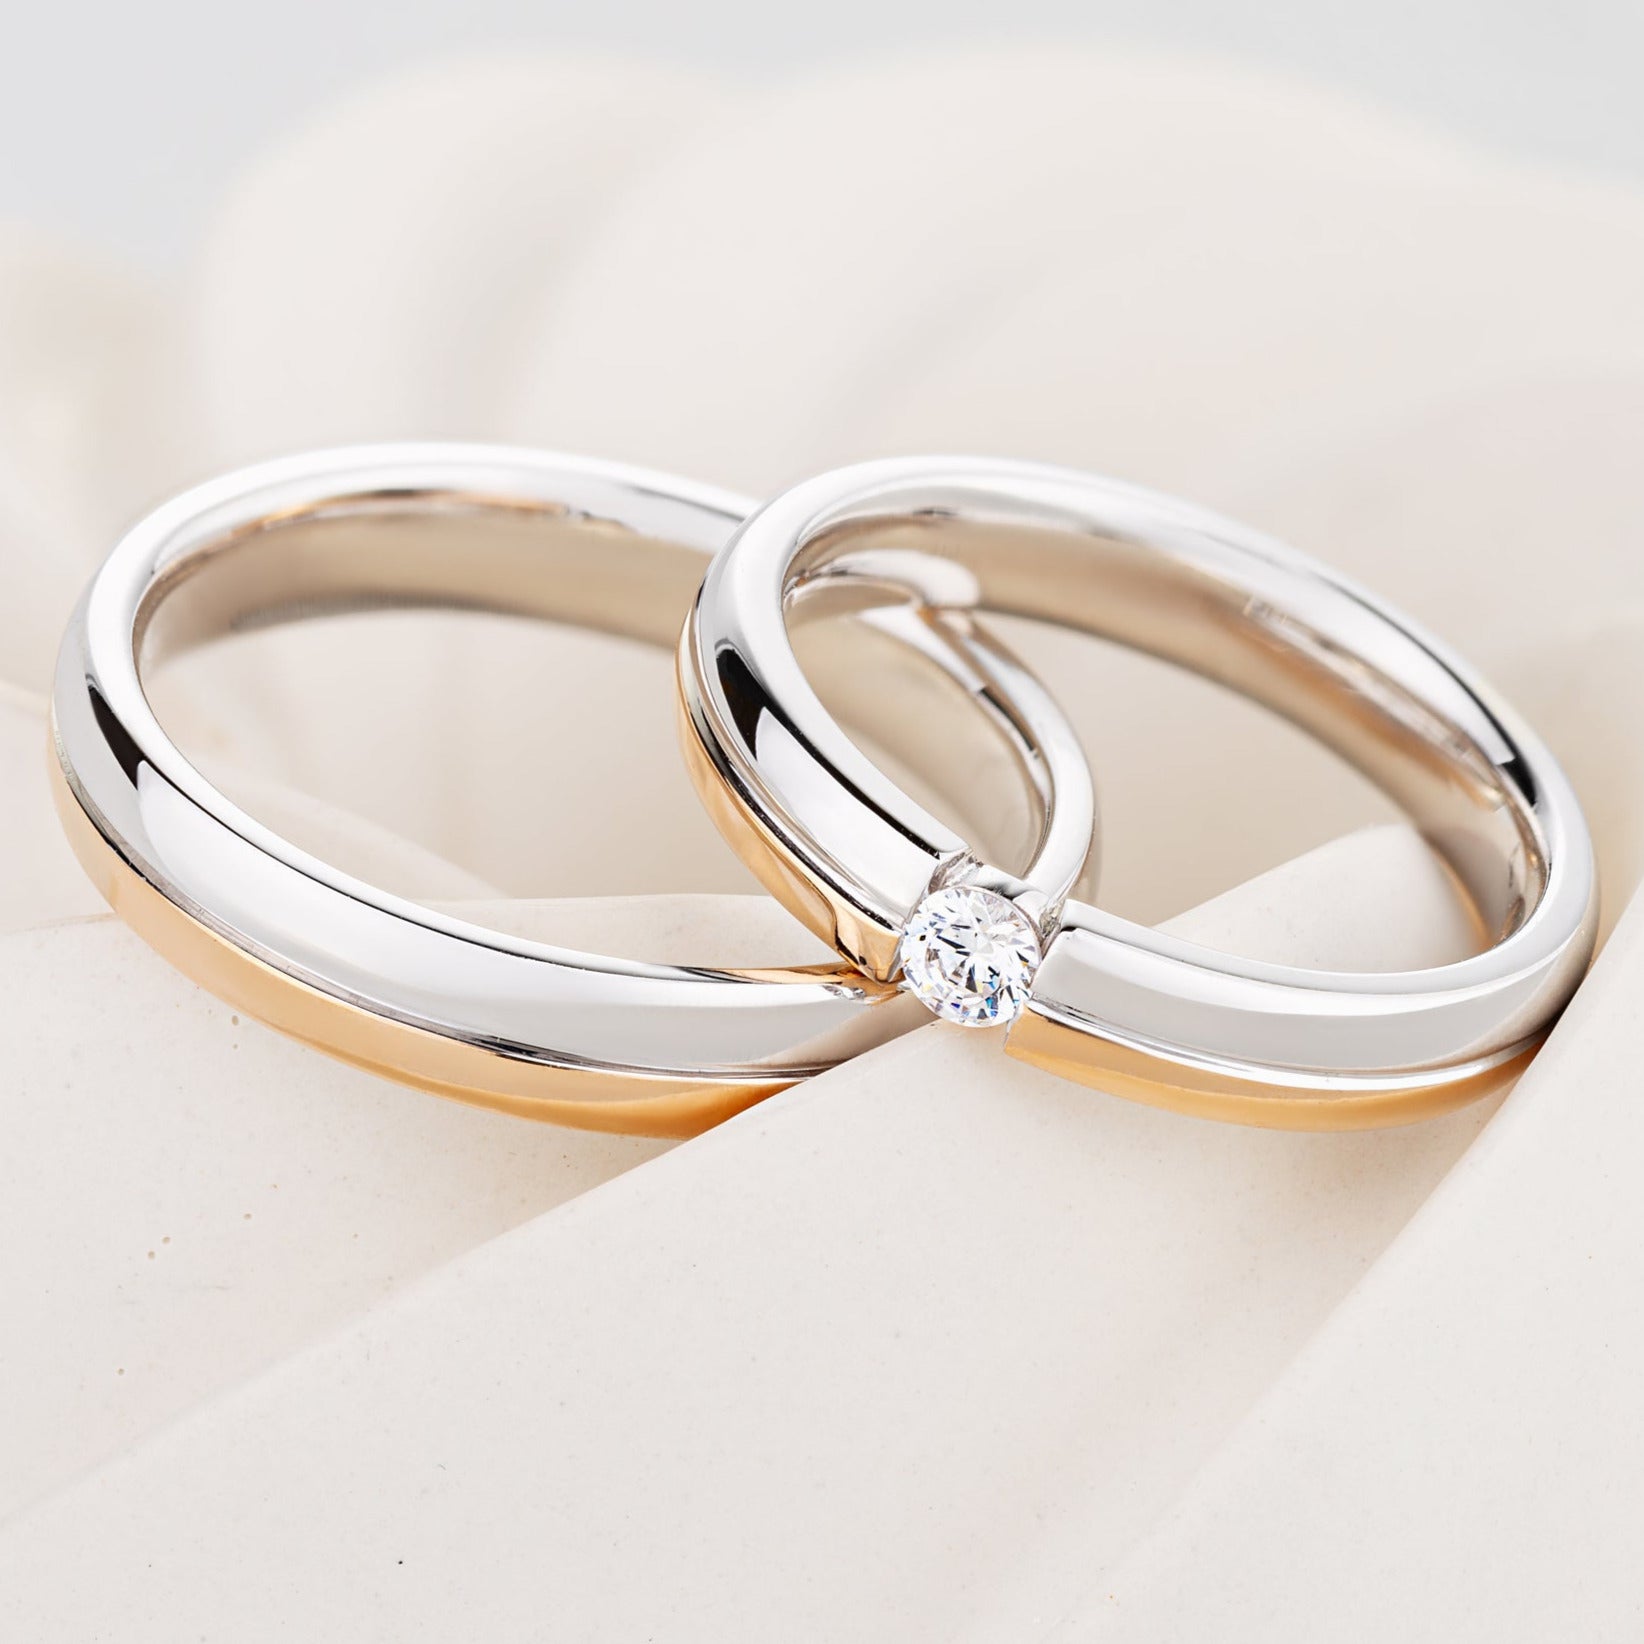 Wedding bands set made of two colors of gold and diamond. Maching wedding rings. Diamond wedding bands. His and hesrs wedding rings set. Classic wedding bands with diamond. Two-rone wedding bands